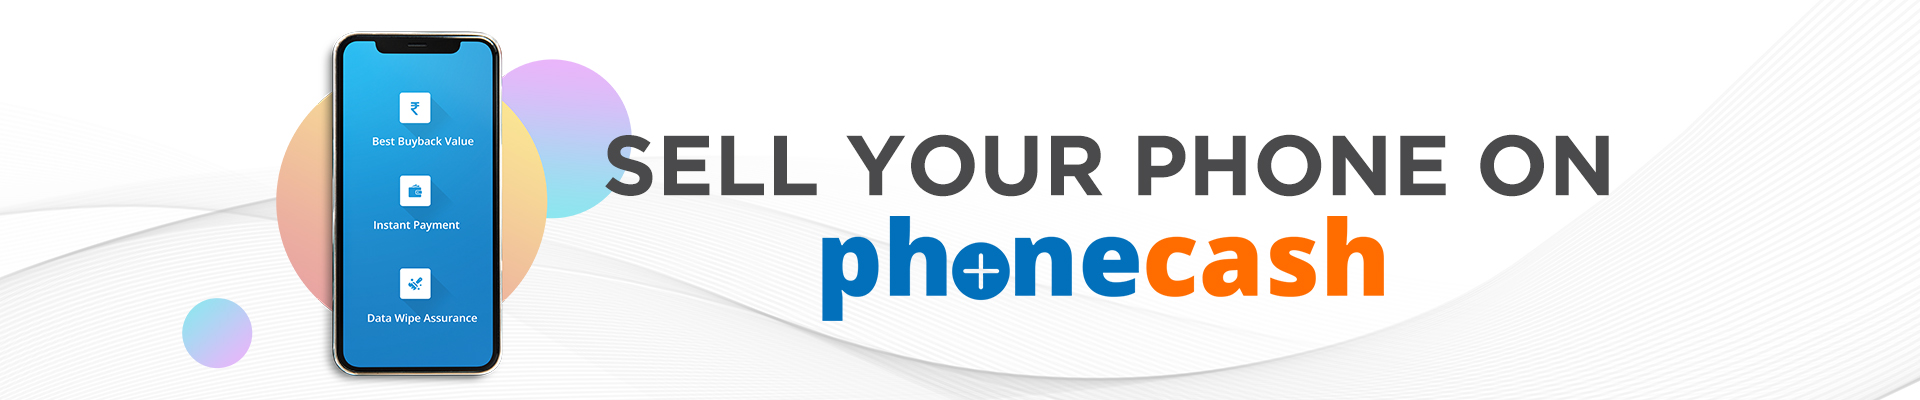 Sell your phone on phonecash